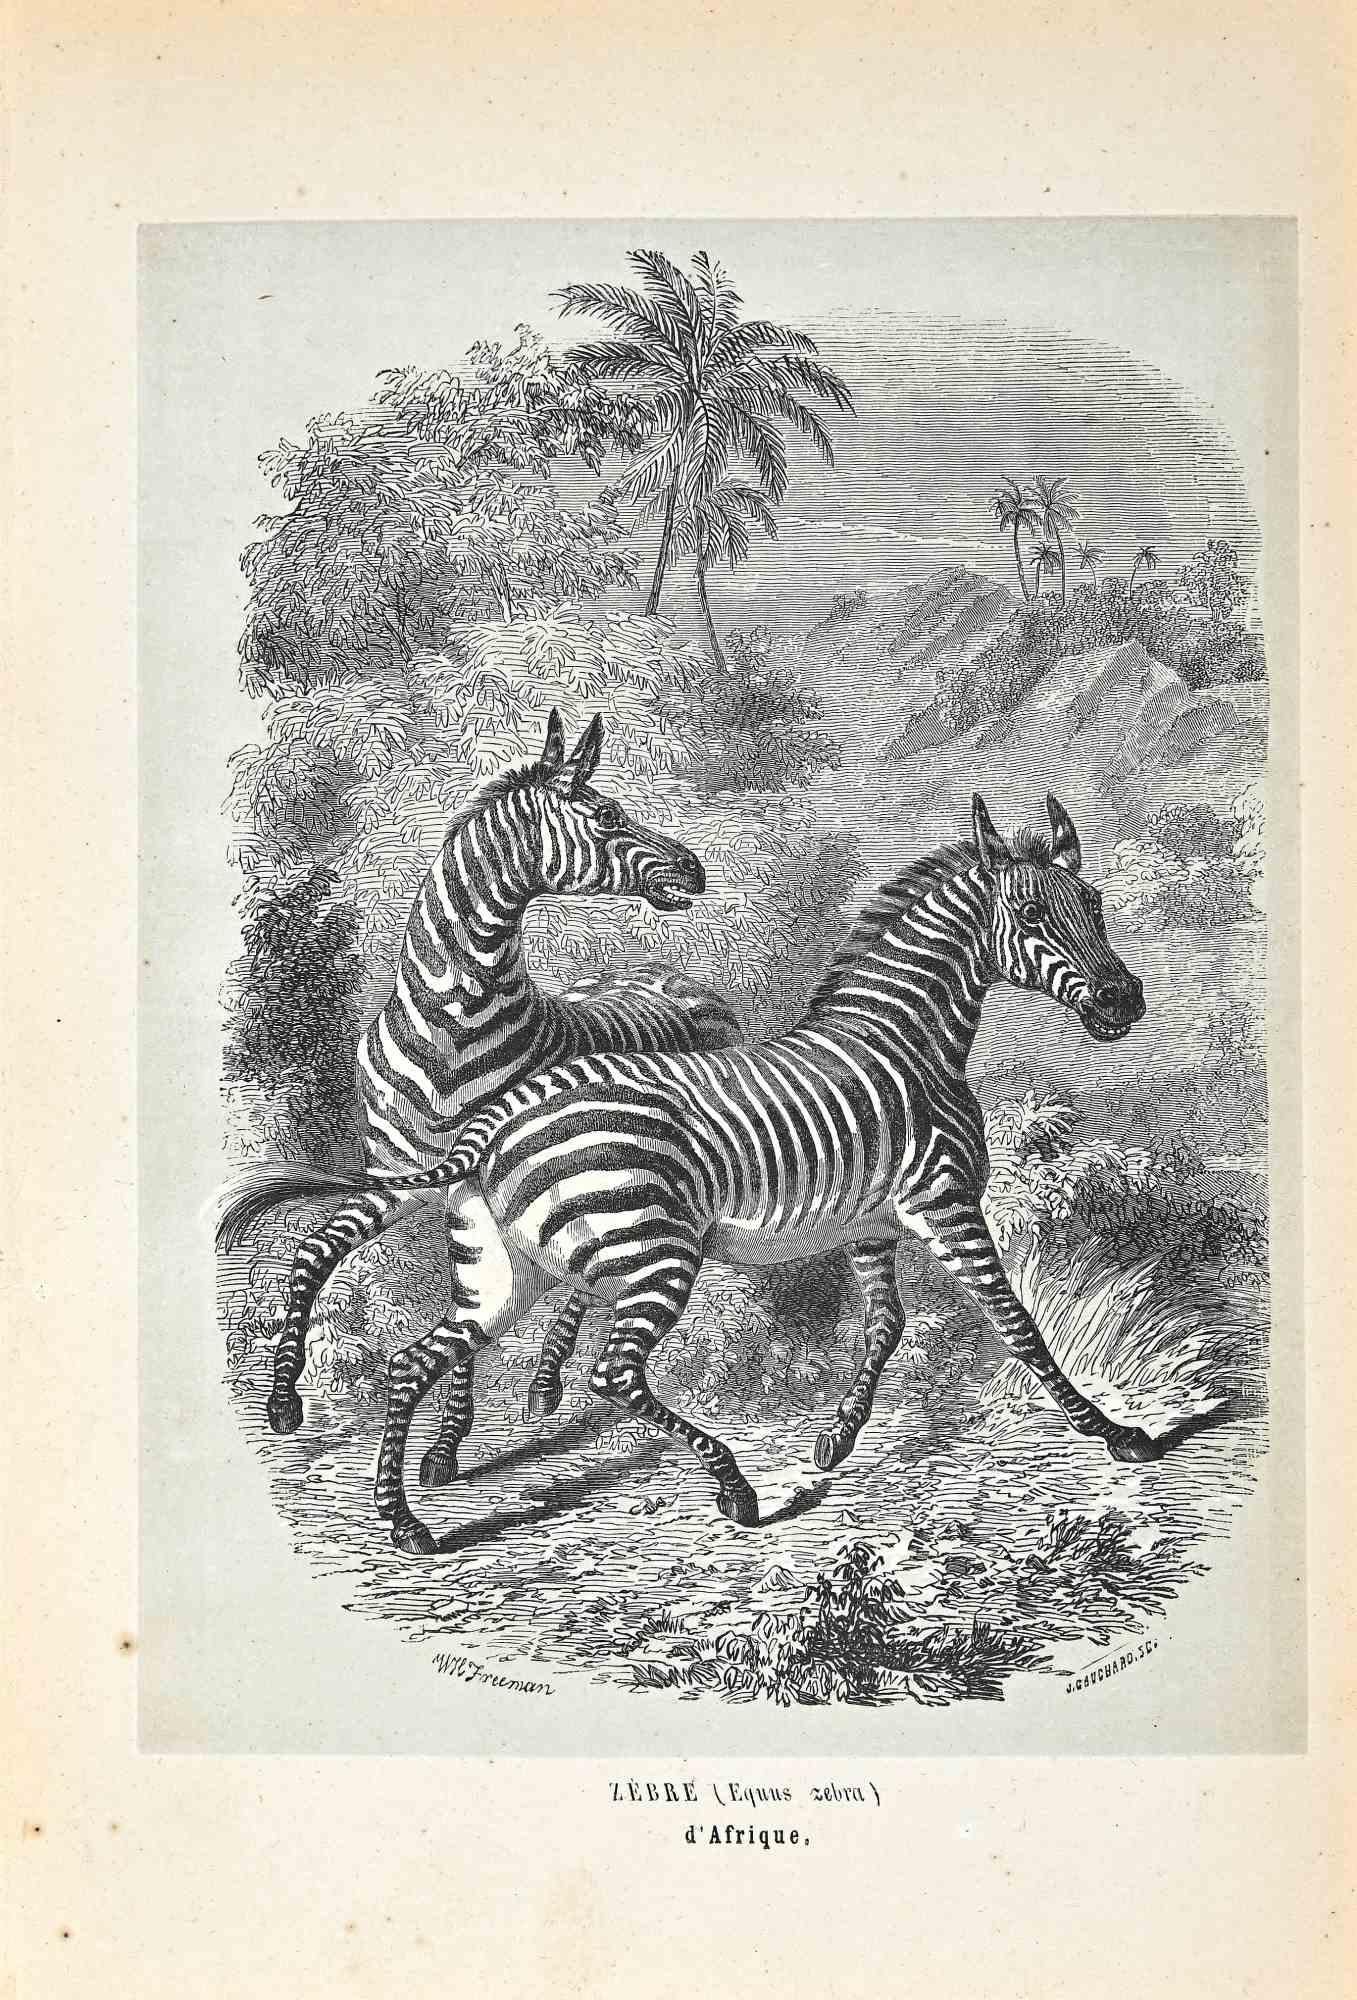 Zebra is an original lithograph on ivory-colored paper, realized by Paul Gervais (1816-1879). The artwork is from The Series of "Les Trois Règnes de la Nature", and was published in 1854.

Good conditions except for some foxings.

Titled on the